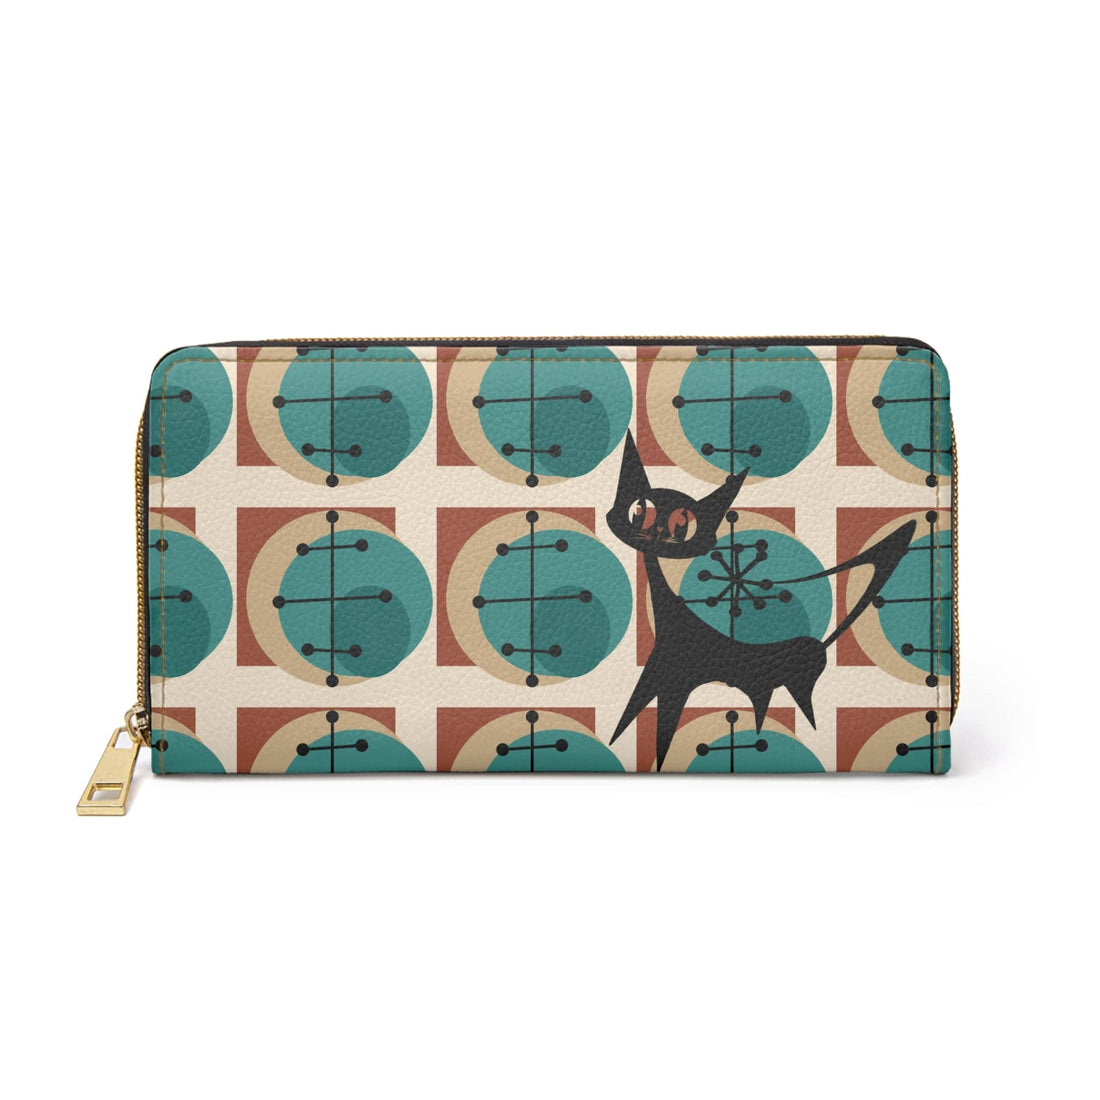 Atomic Cat, Kitschy Mid Mod, Geometric Brown, Teal,  Retro Zipper Wallet Accessories One size / White